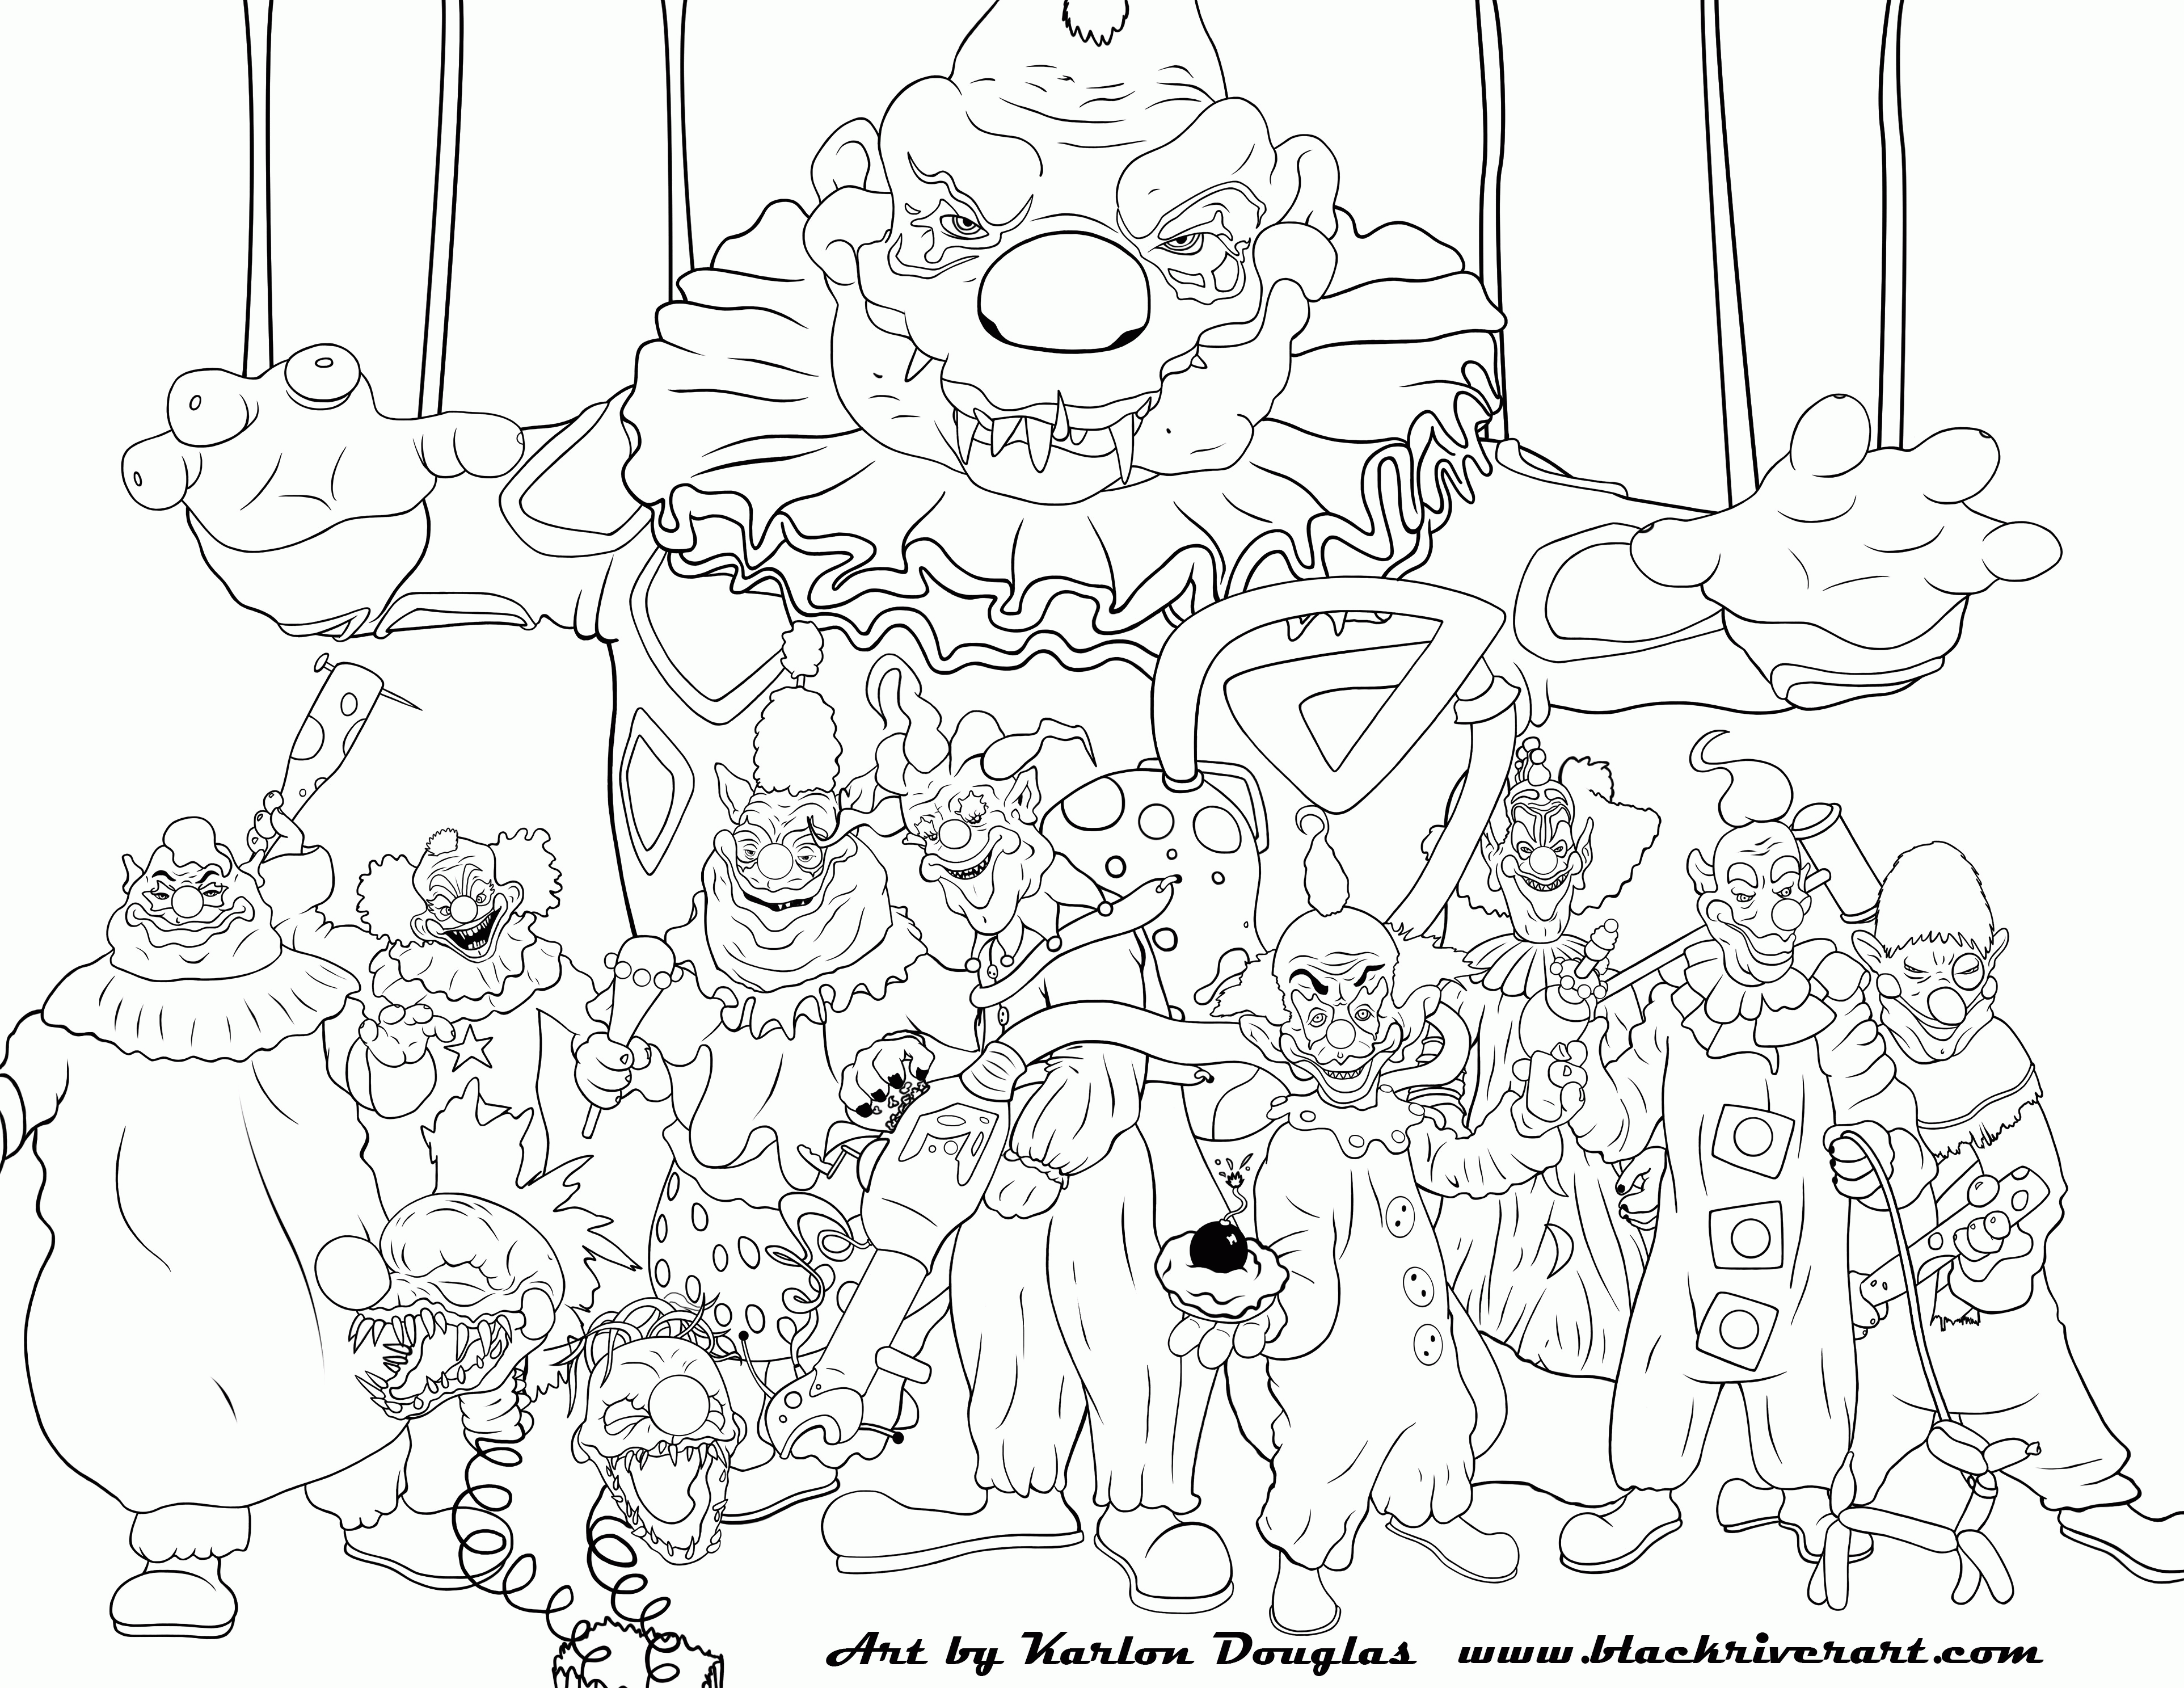 animal kingdom colouring book tips animals from every class of the animal kingdom coloring page tips animal kingdom book colouring 